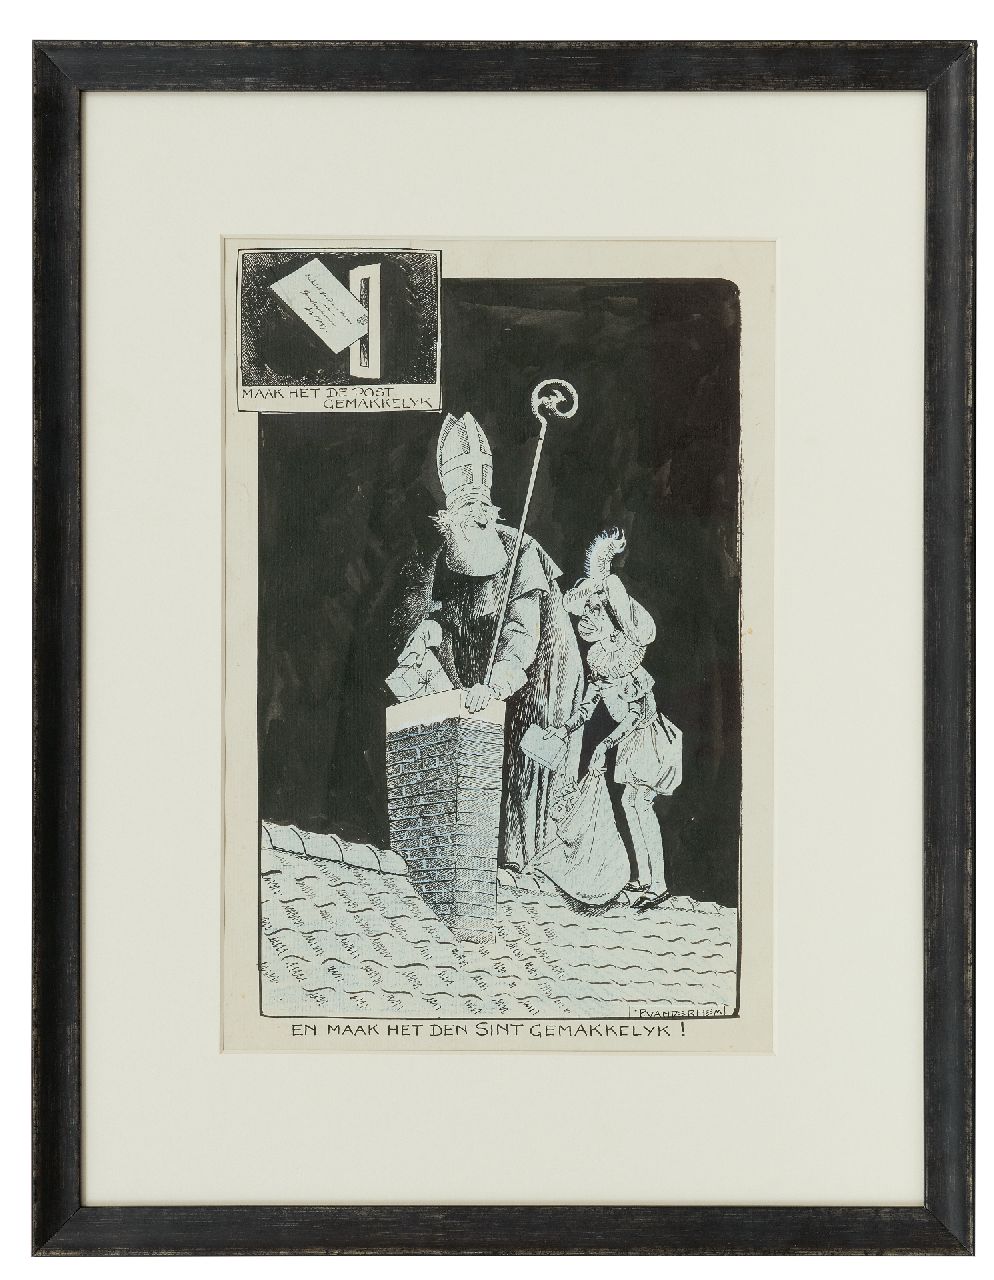 Hem P. van der | Pieter 'Piet' van der Hem | Watercolours and drawings offered for sale | St Nicholas' Eve, Indian ink and chalk on paper 38.5 x 24.8 cm, signed l.r.